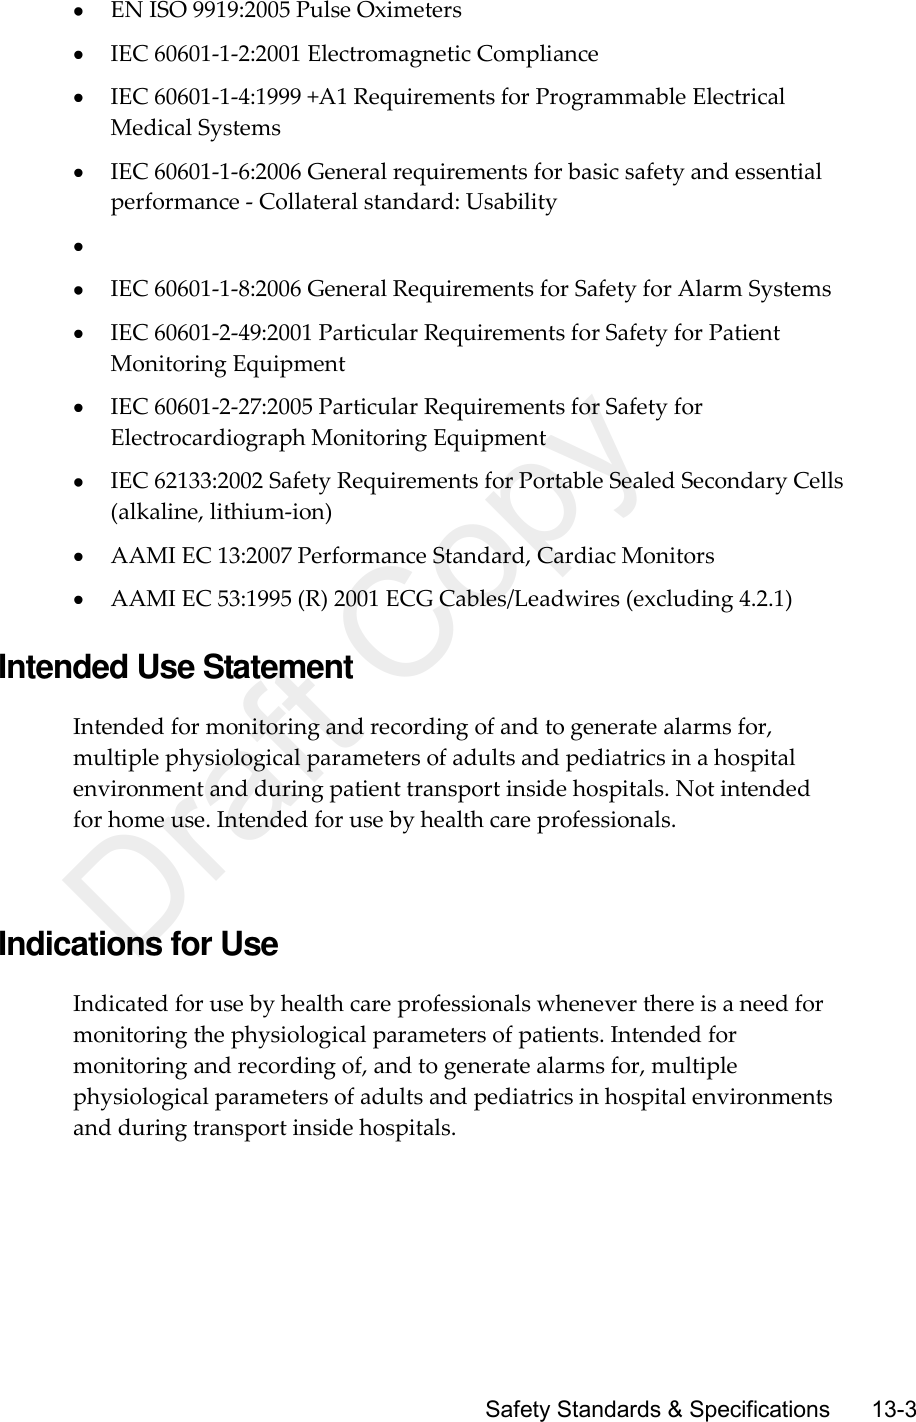      Safety Standards &amp; Specifications       13-3  EN ISO 9919:2005 Pulse Oximeters  IEC 60601-1-2:2001 Electromagnetic Compliance  IEC 60601-1-4:1999 +A1 Requirements for Programmable Electrical Medical Systems  IEC 60601-1-6:2006 General requirements for basic safety and essential performance - Collateral standard: Usability    IEC 60601-1-8:2006 General Requirements for Safety for Alarm Systems  IEC 60601-2-49:2001 Particular Requirements for Safety for Patient Monitoring Equipment  IEC 60601-2-27:2005 Particular Requirements for Safety for Electrocardiograph Monitoring Equipment  IEC 62133:2002 Safety Requirements for Portable Sealed Secondary Cells (alkaline, lithium-ion)  AAMI EC 13:2007 Performance Standard, Cardiac Monitors  AAMI EC 53:1995 (R) 2001 ECG Cables/Leadwires (excluding 4.2.1)  Intended Use Statement Intended for monitoring and recording of and to generate alarms for, multiple physiological parameters of adults and pediatrics in a hospital environment and during patient transport inside hospitals. Not intended for home use. Intended for use by health care professionals.   Indications for Use Indicated for use by health care professionals whenever there is a need for monitoring the physiological parameters of patients. Intended for monitoring and recording of, and to generate alarms for, multiple physiological parameters of adults and pediatrics in hospital environments and during transport inside hospitals.  Draft Copy